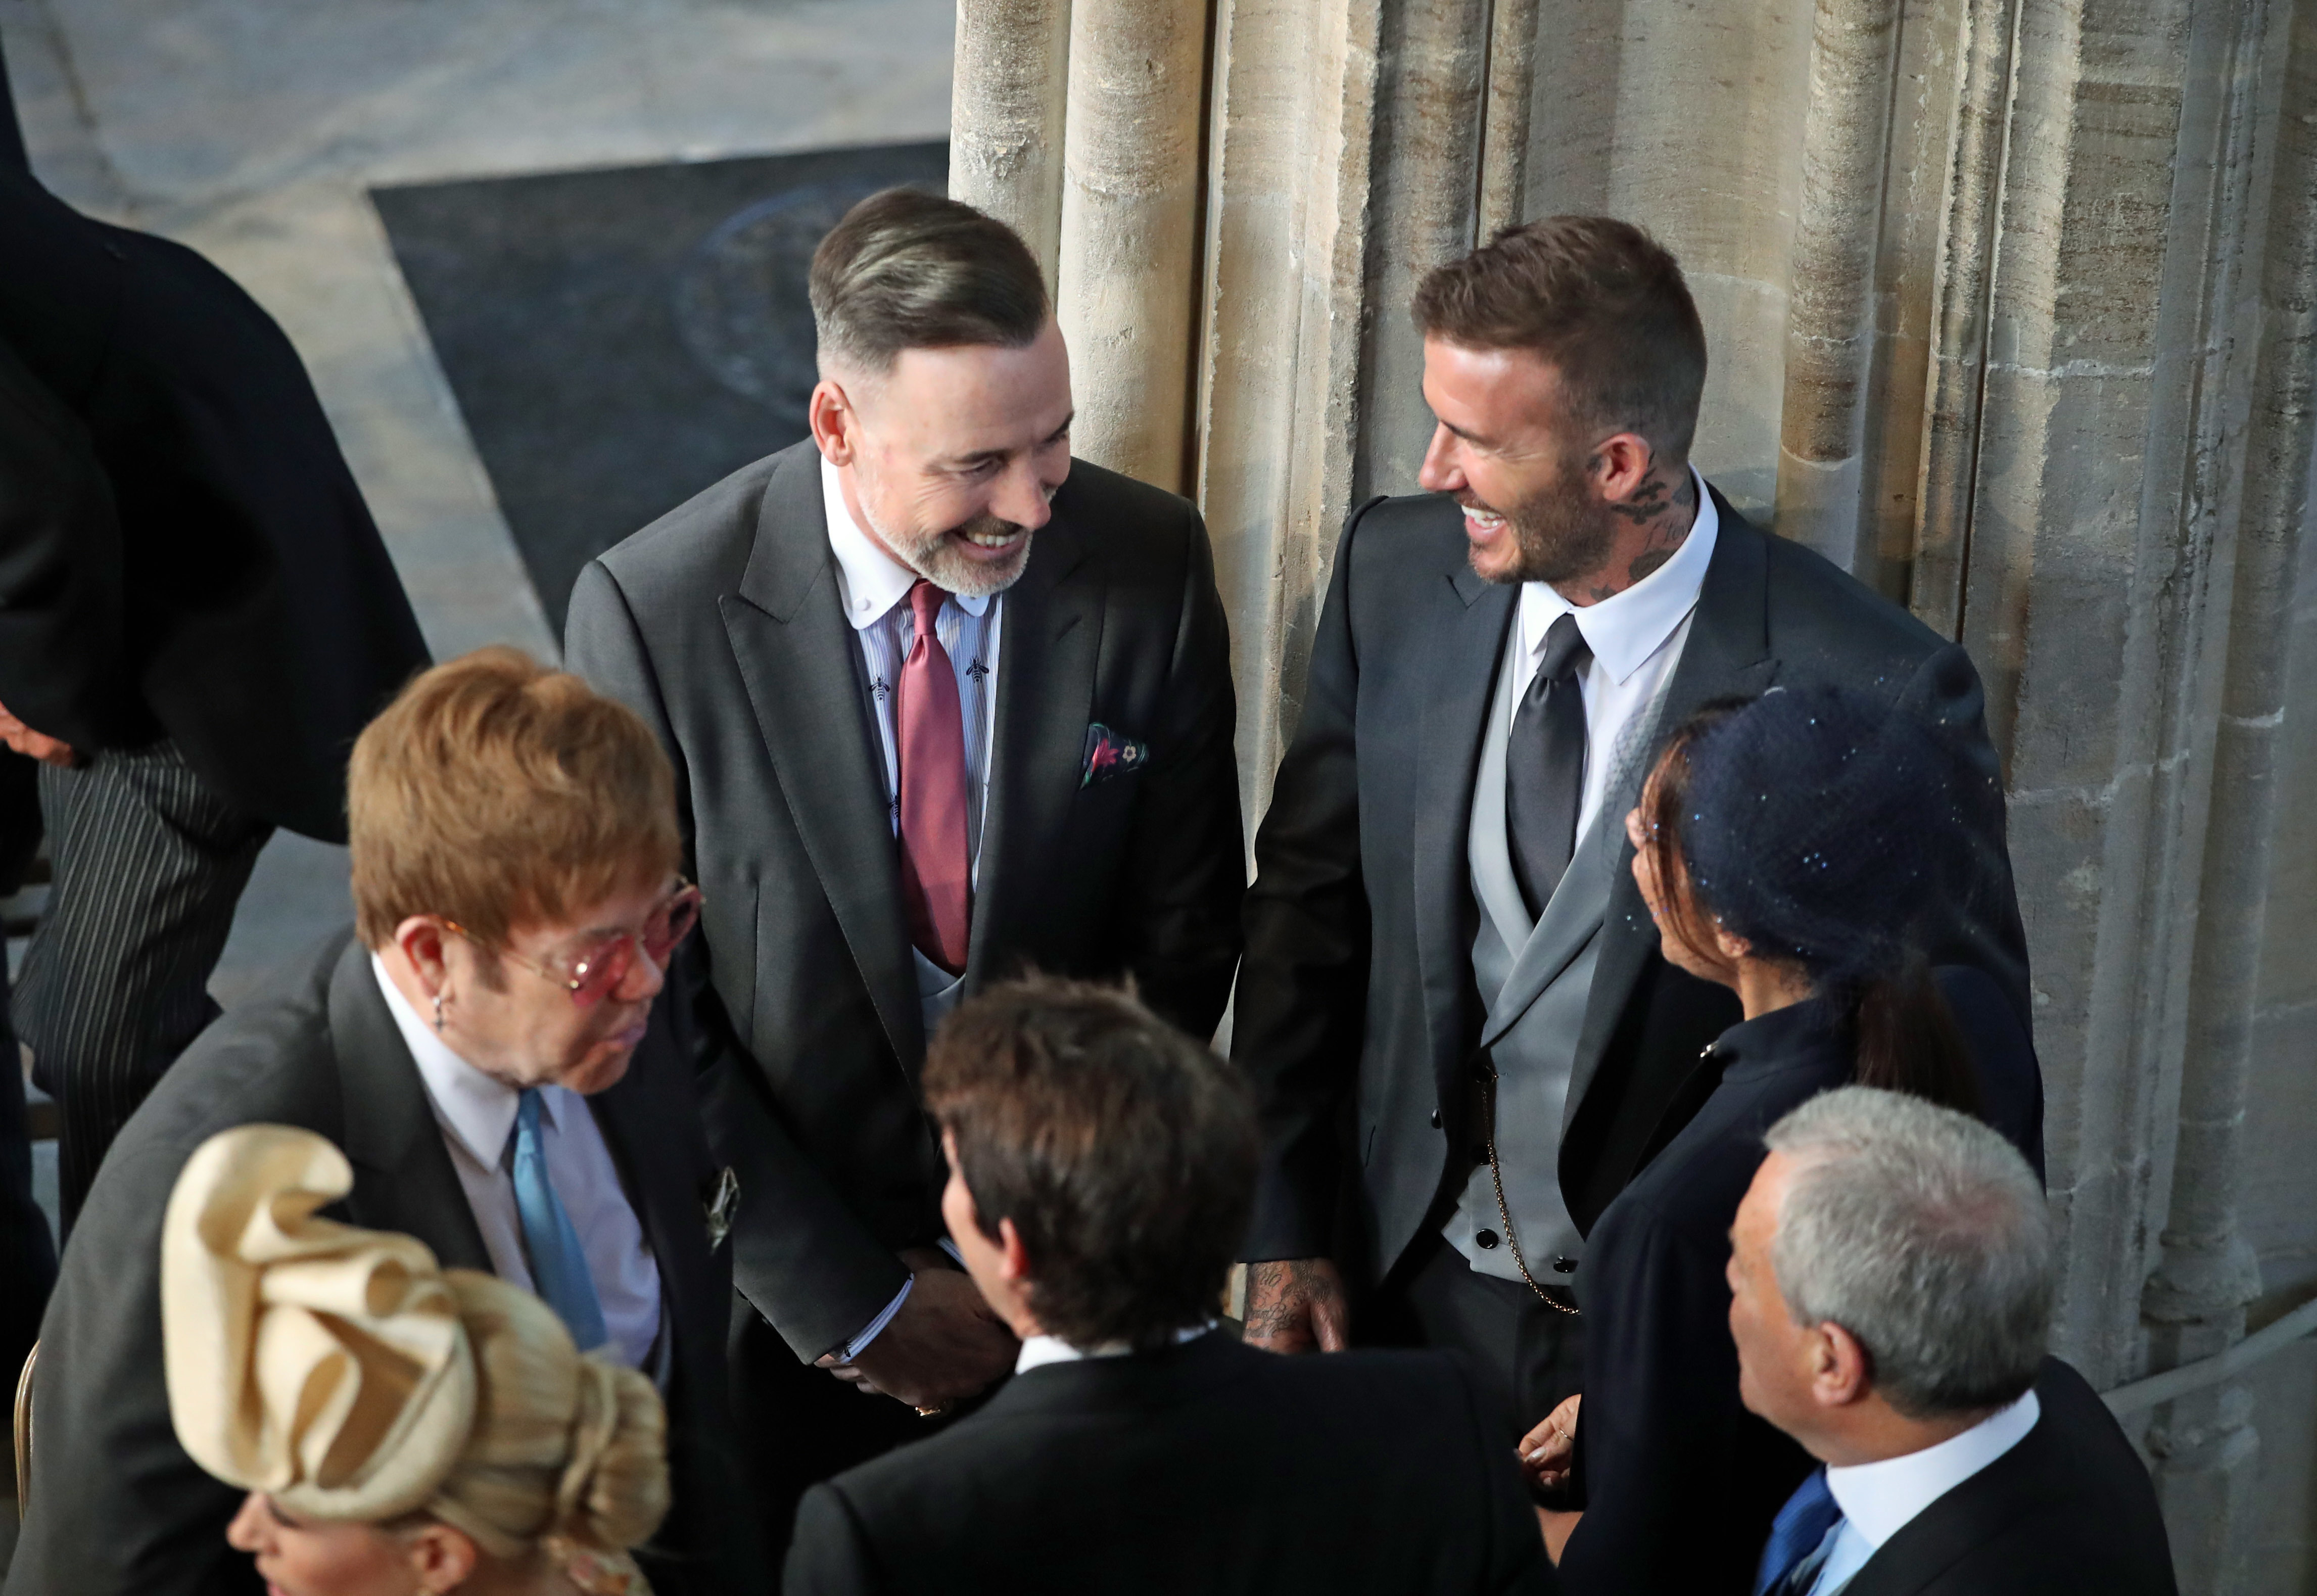 David and Victoria Beckham (both right) talk with Sir Elton John (left) and David Furnish as they arrive in St George's Chapel at Windsor Castle for the wedding of Prince Harry and Meghan Markle.